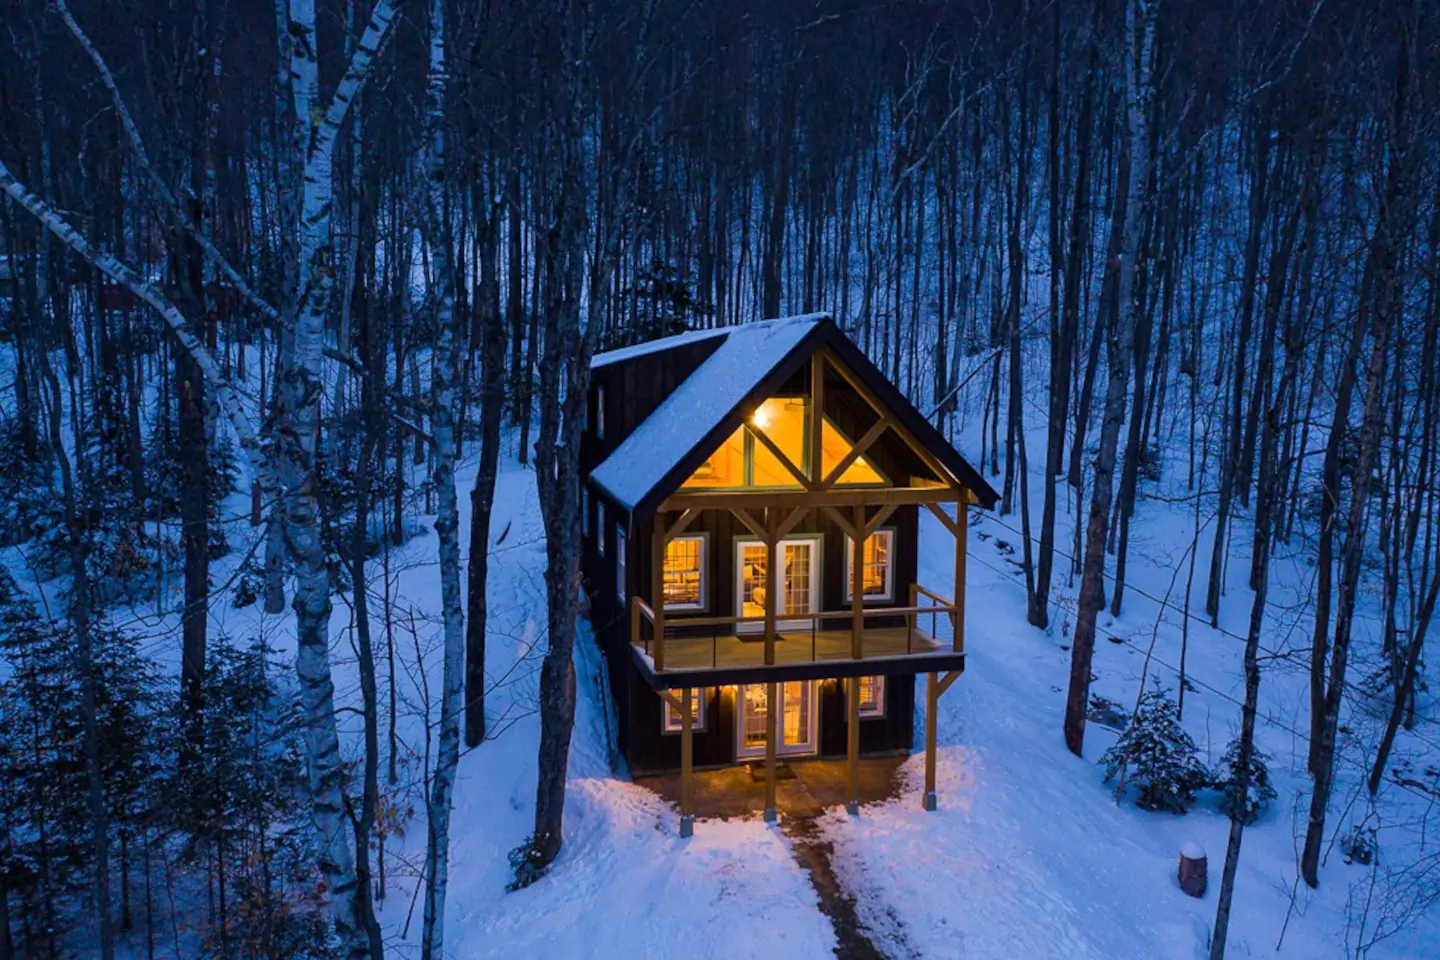 A two story chalet with interior lights on in the middle of the snowy woods at night